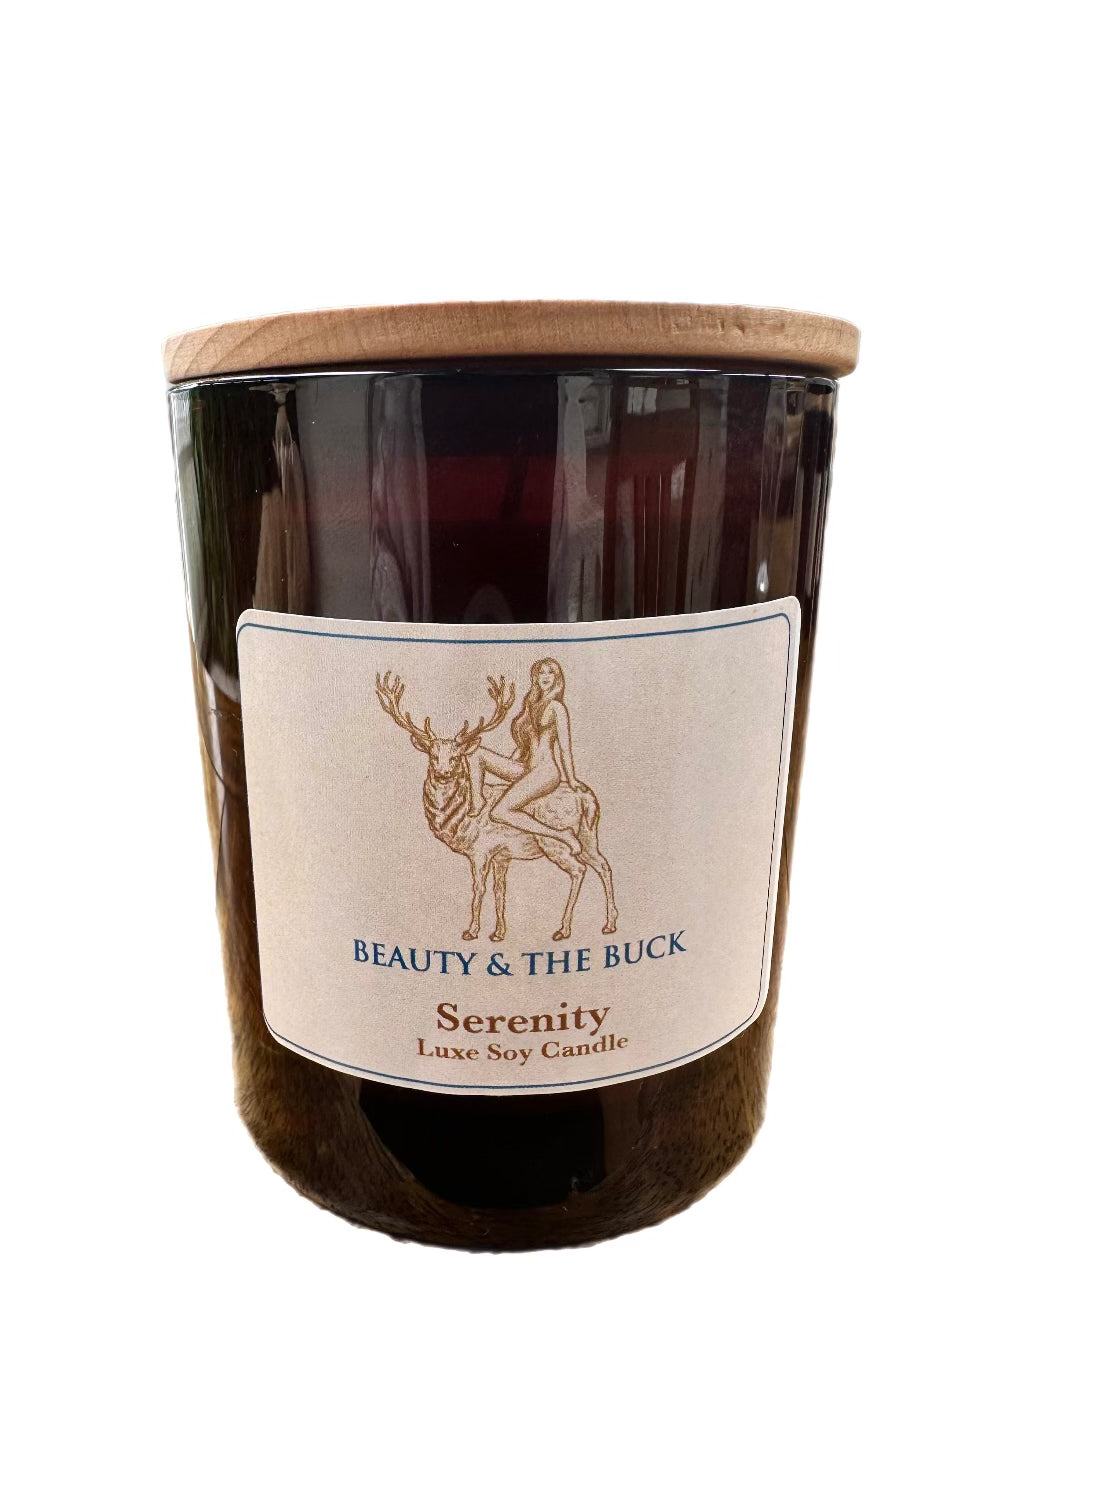 Beauty and the Buck Serenity Soy Candle